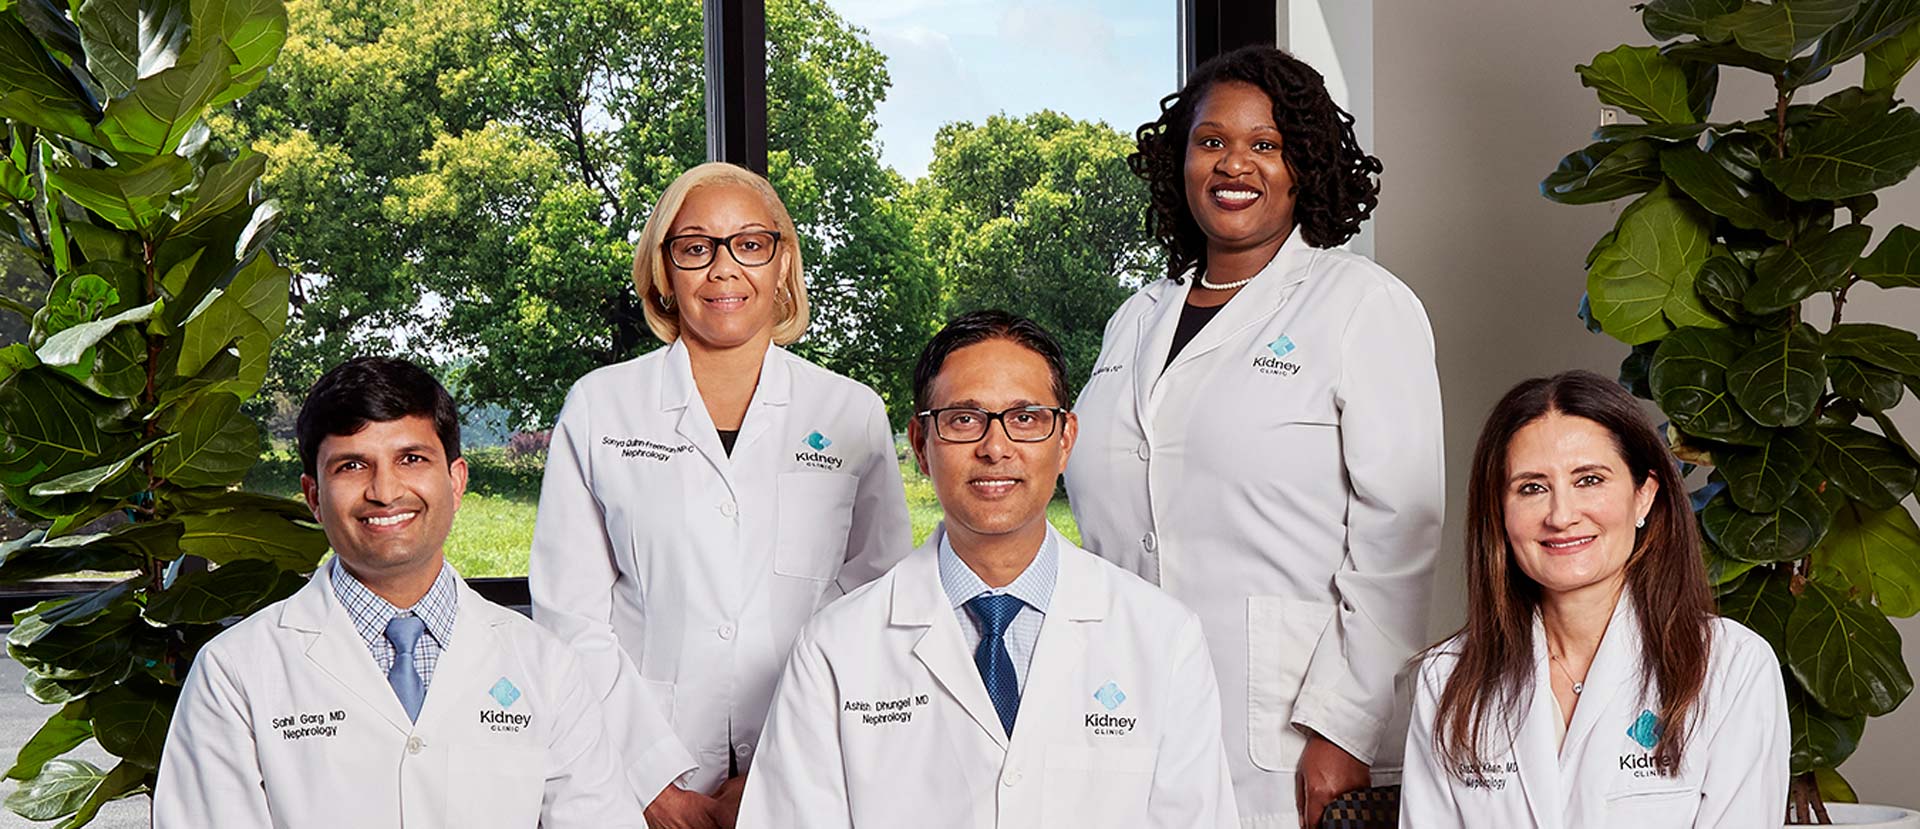 Meet the nephrology team of Kidney Clinic | Nephrologists in Newnan, Coweta County, Peachtree City, Fayette County